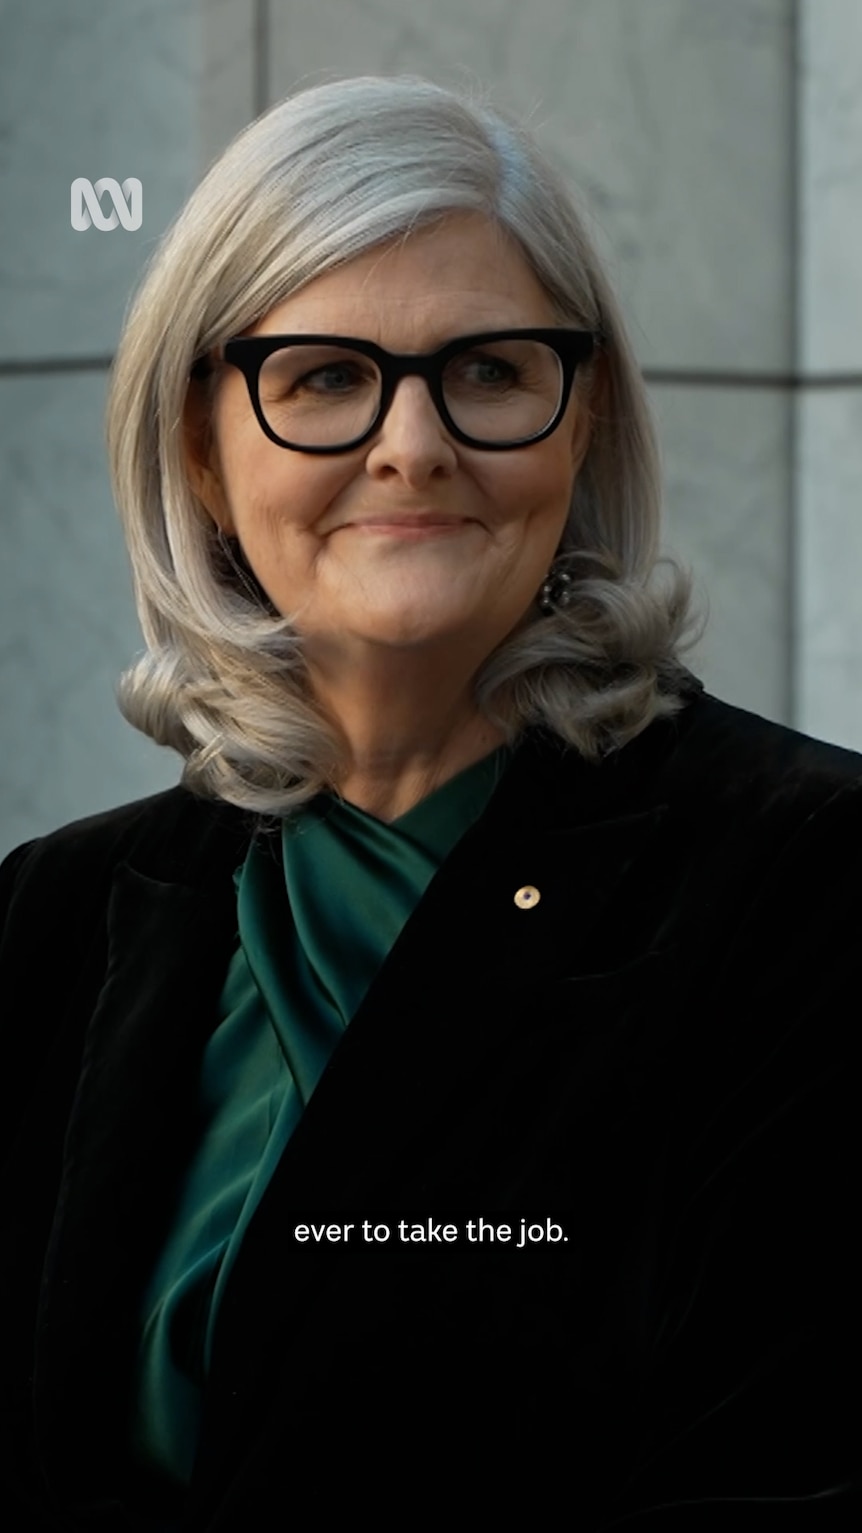 Woman with grey hair and glasses in businesswear smiles  